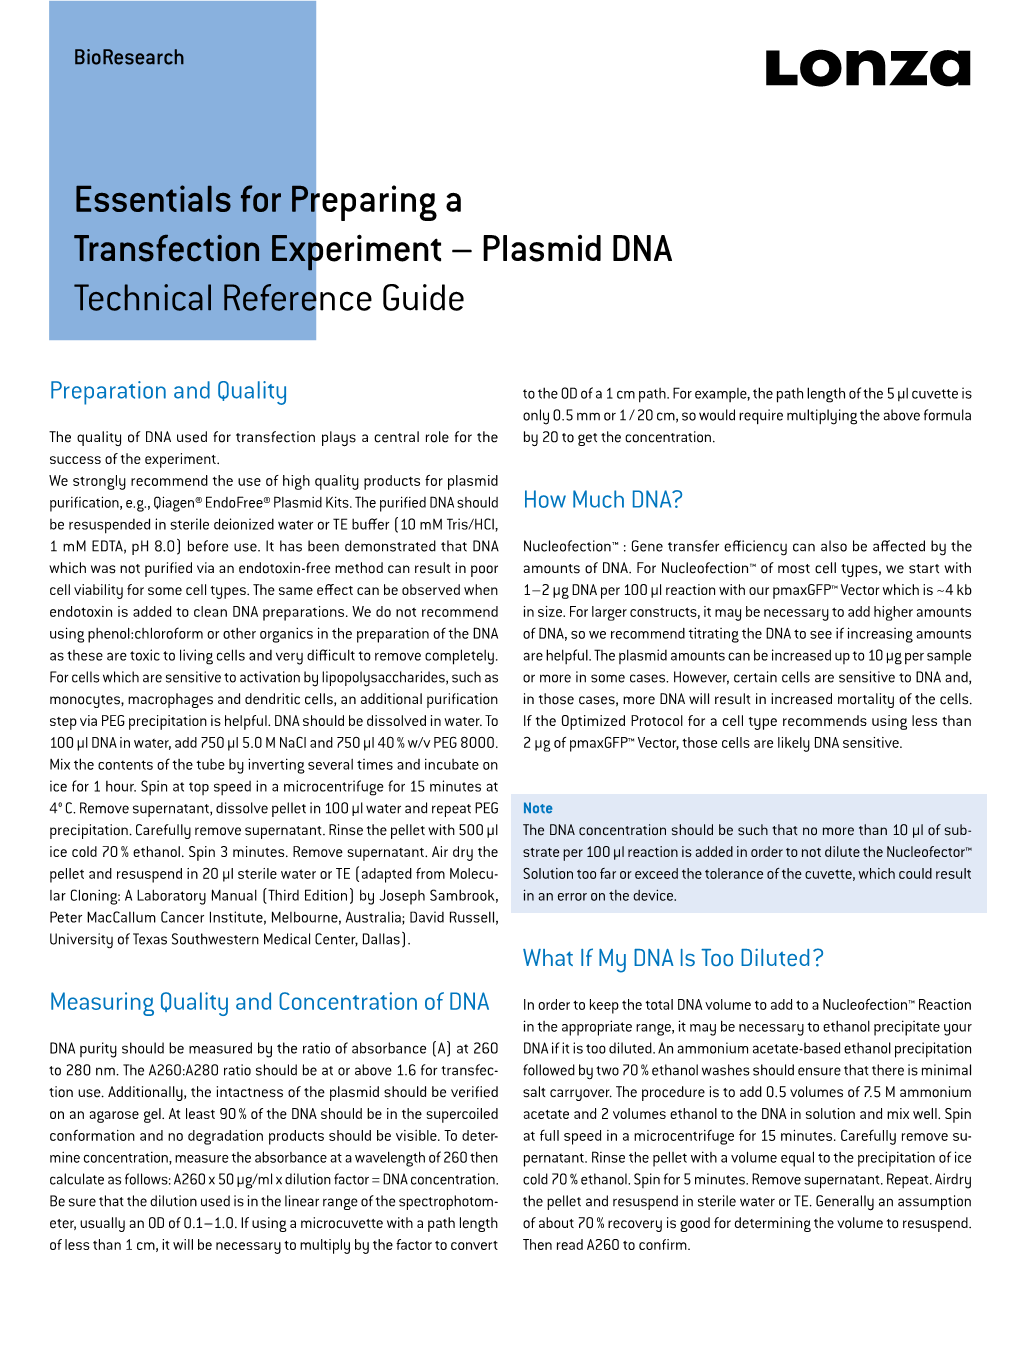 Plasmid DNA – Technical Reference Guide